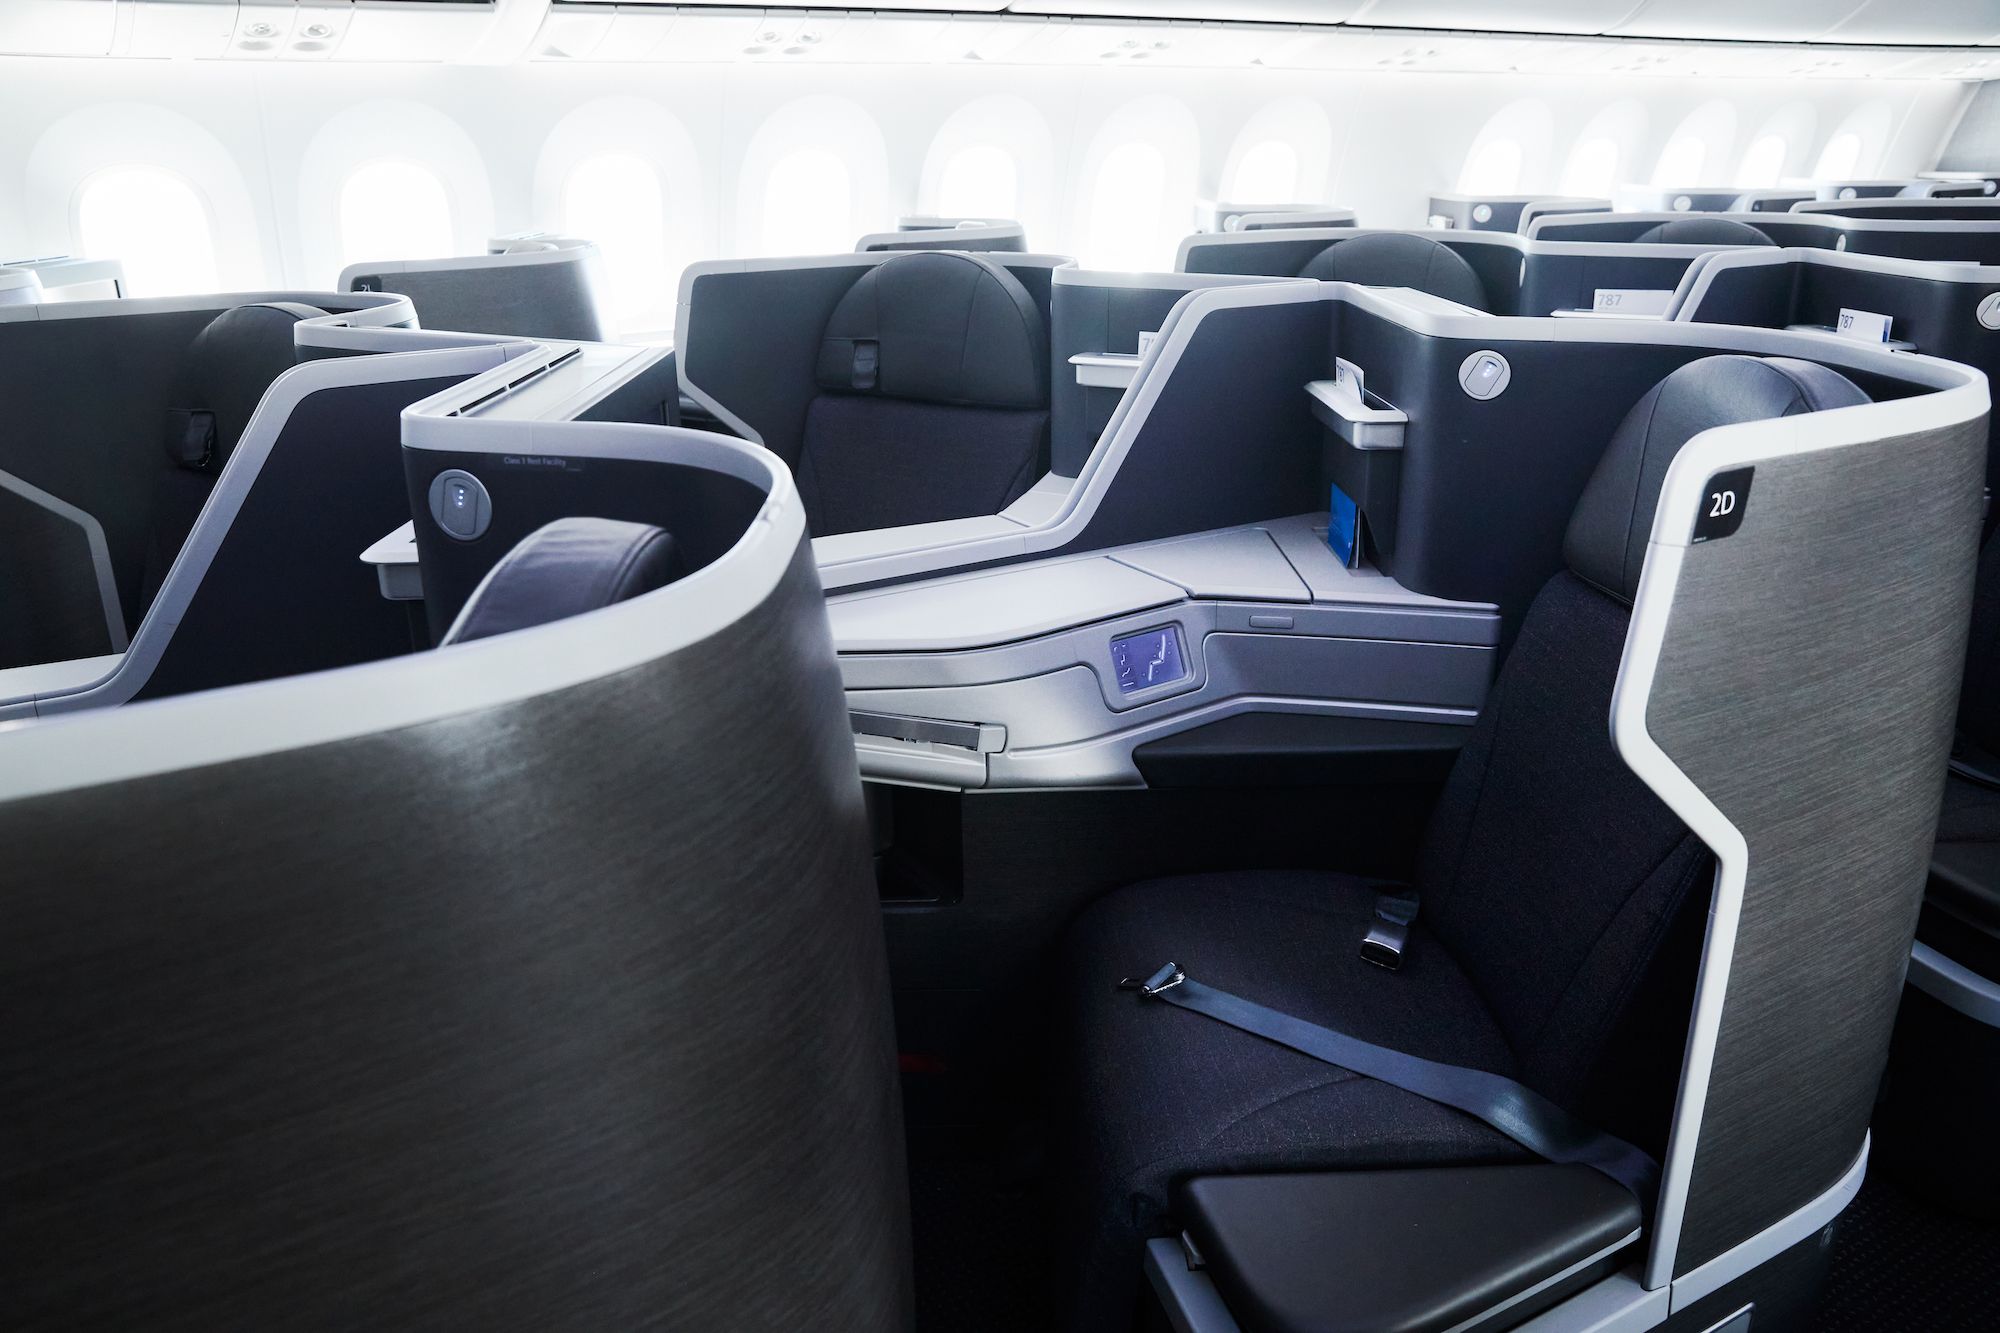 A few American Airlines Flagship Business Class seats.